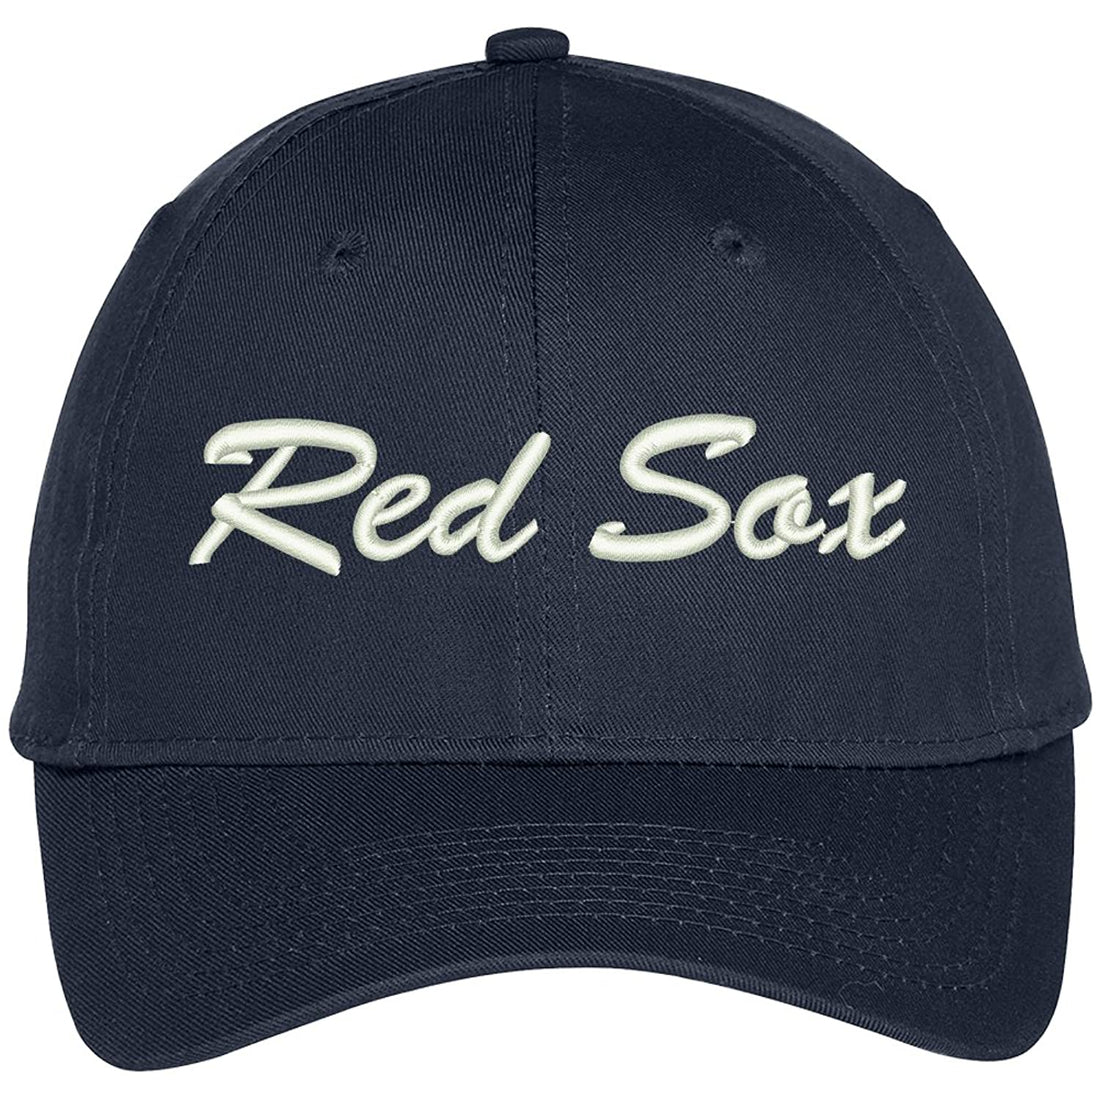 Trendy Apparel Shop Red Sox Embroidered Precurved Adjustable Cap